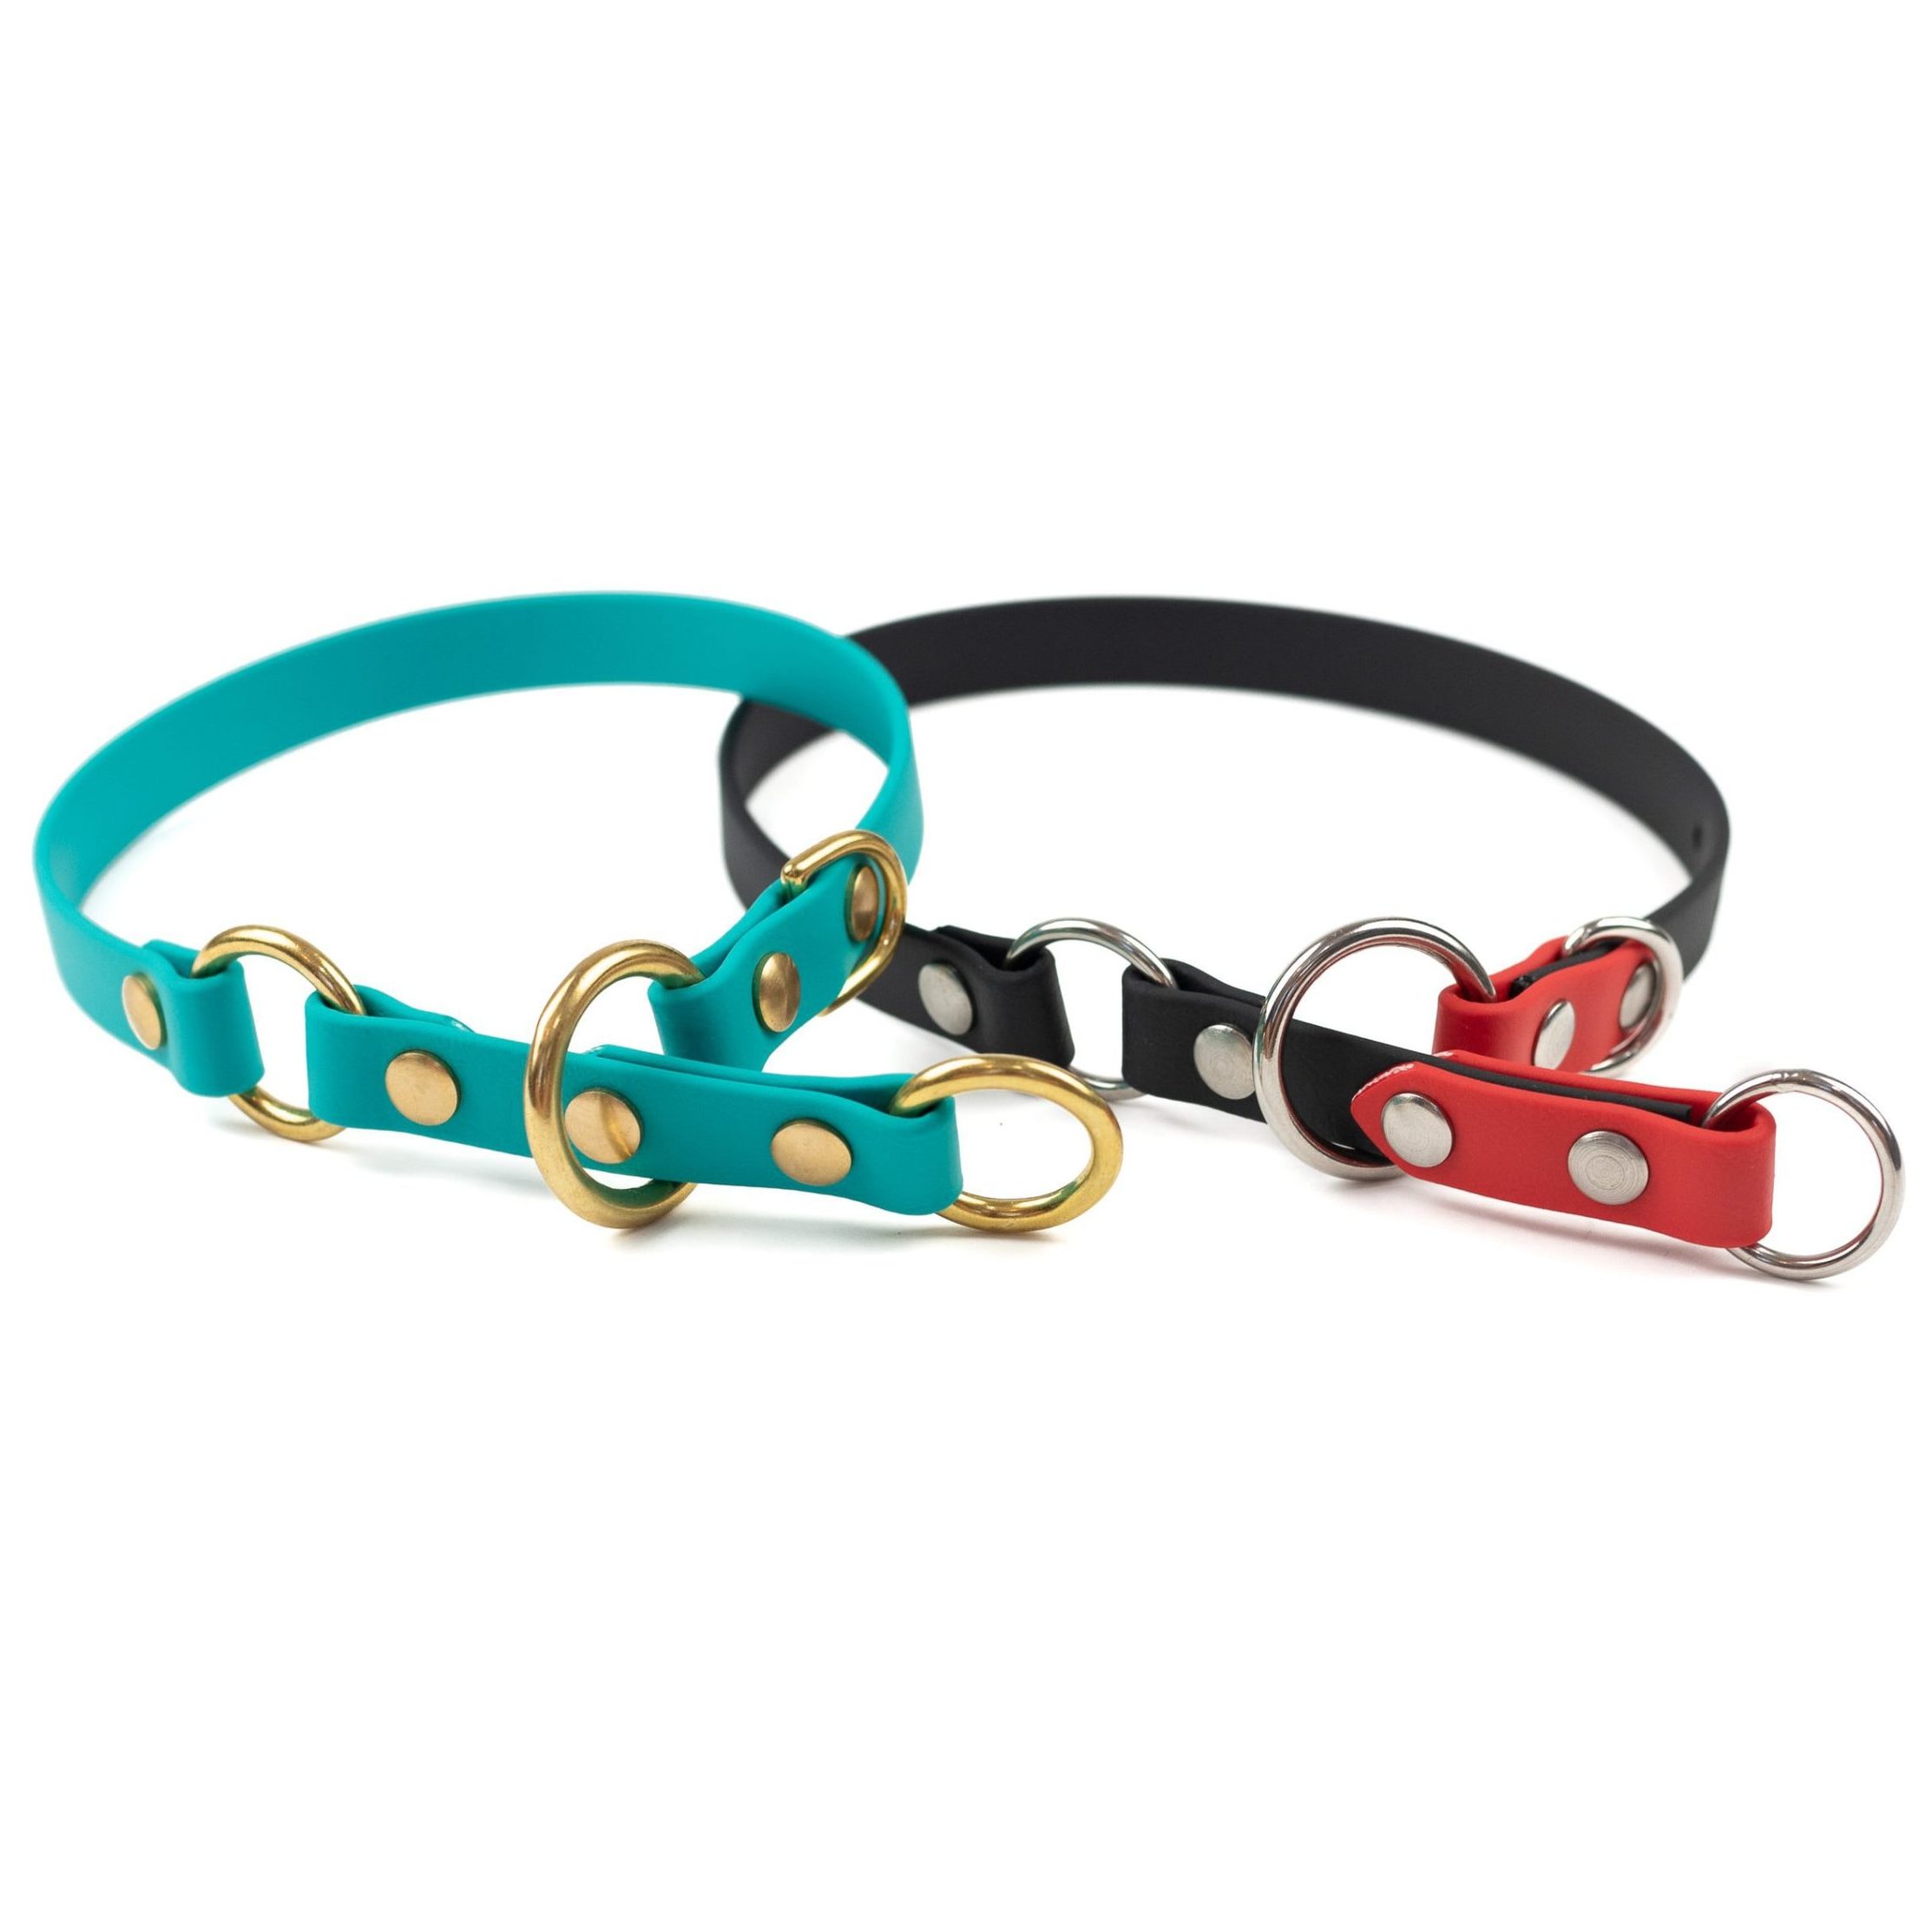 black, red, stainless steel and teal, brass 5/8" o-ring limited slip dog collar